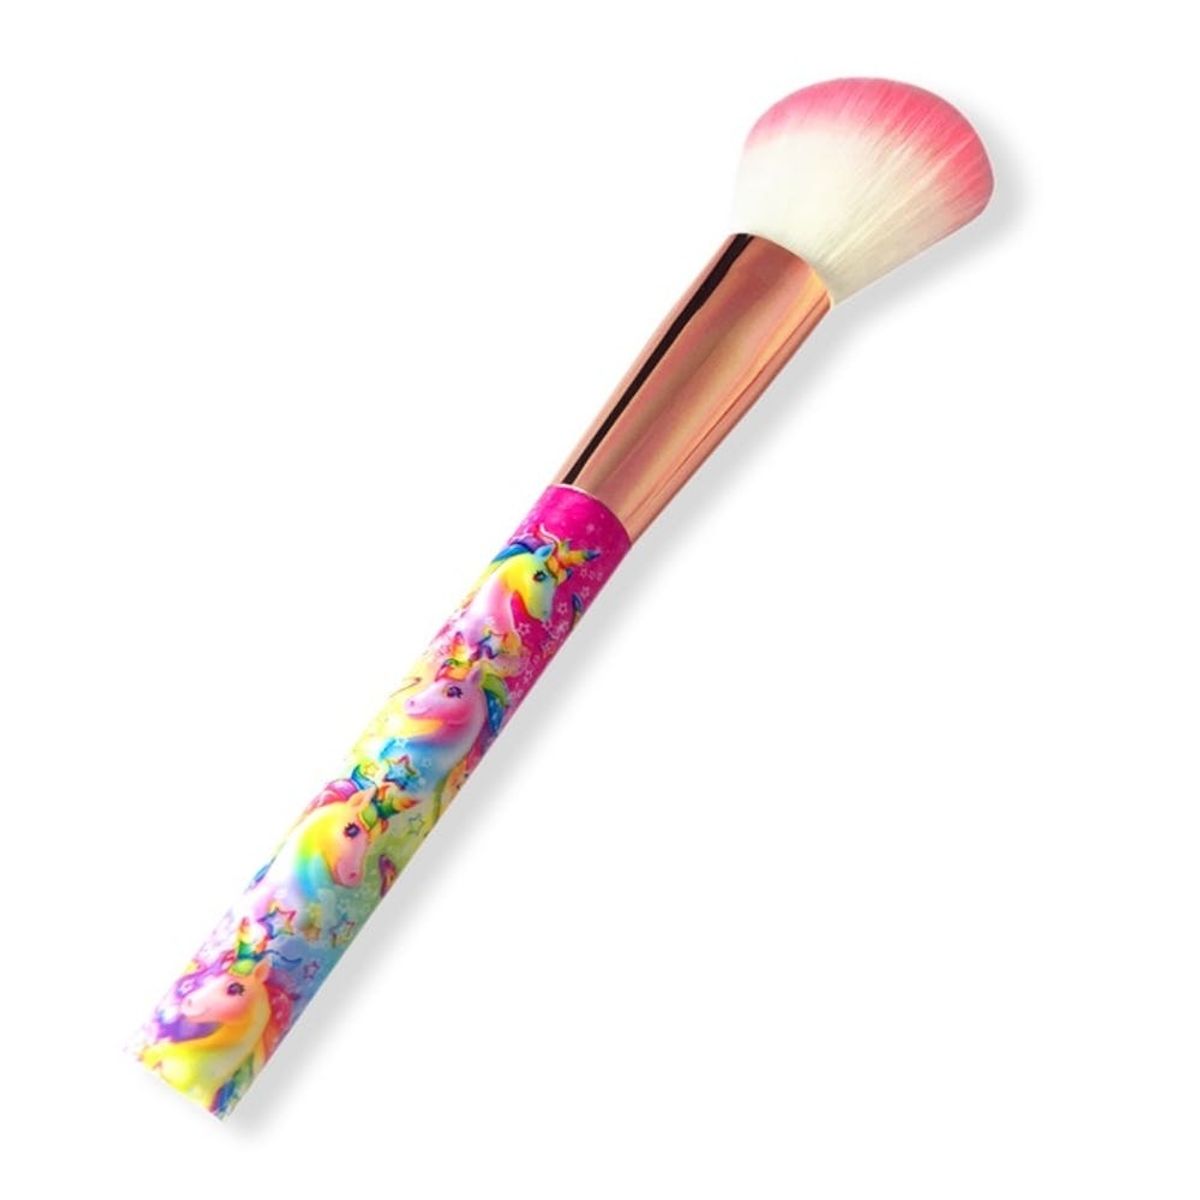 Stop Everything: Lisa Frank Makeup Is Happening